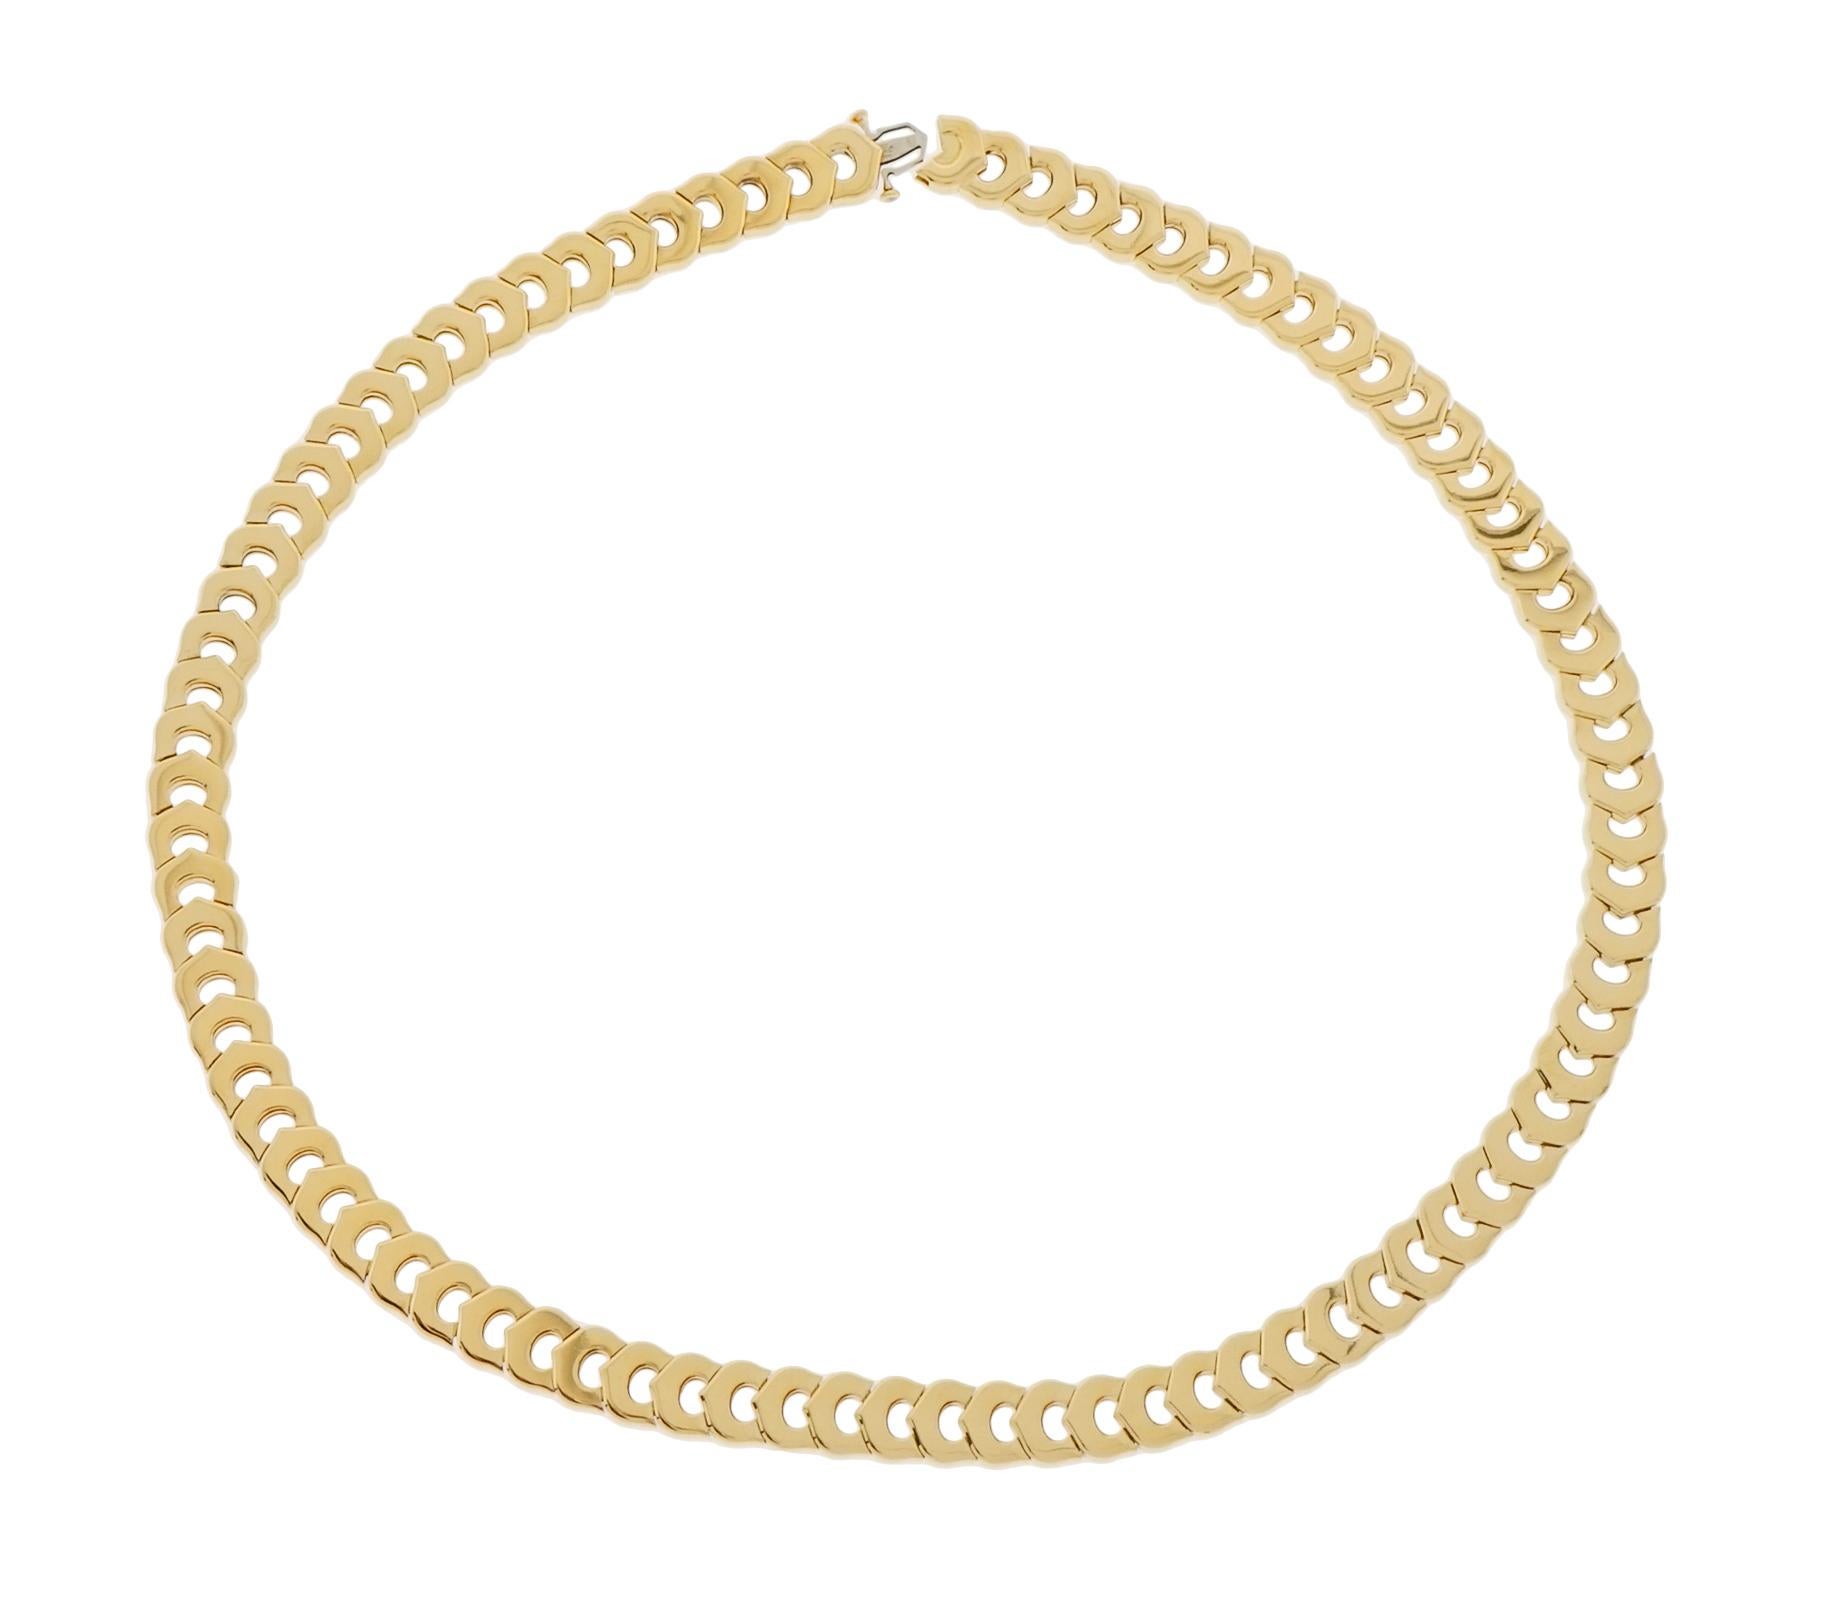 Previously-owned Cartier C De Cartier Collection necklace. The necklace is 17 inches in length, made of 18K rose gold, and weighs 56.50 DWT (approx. 87.87 grams).